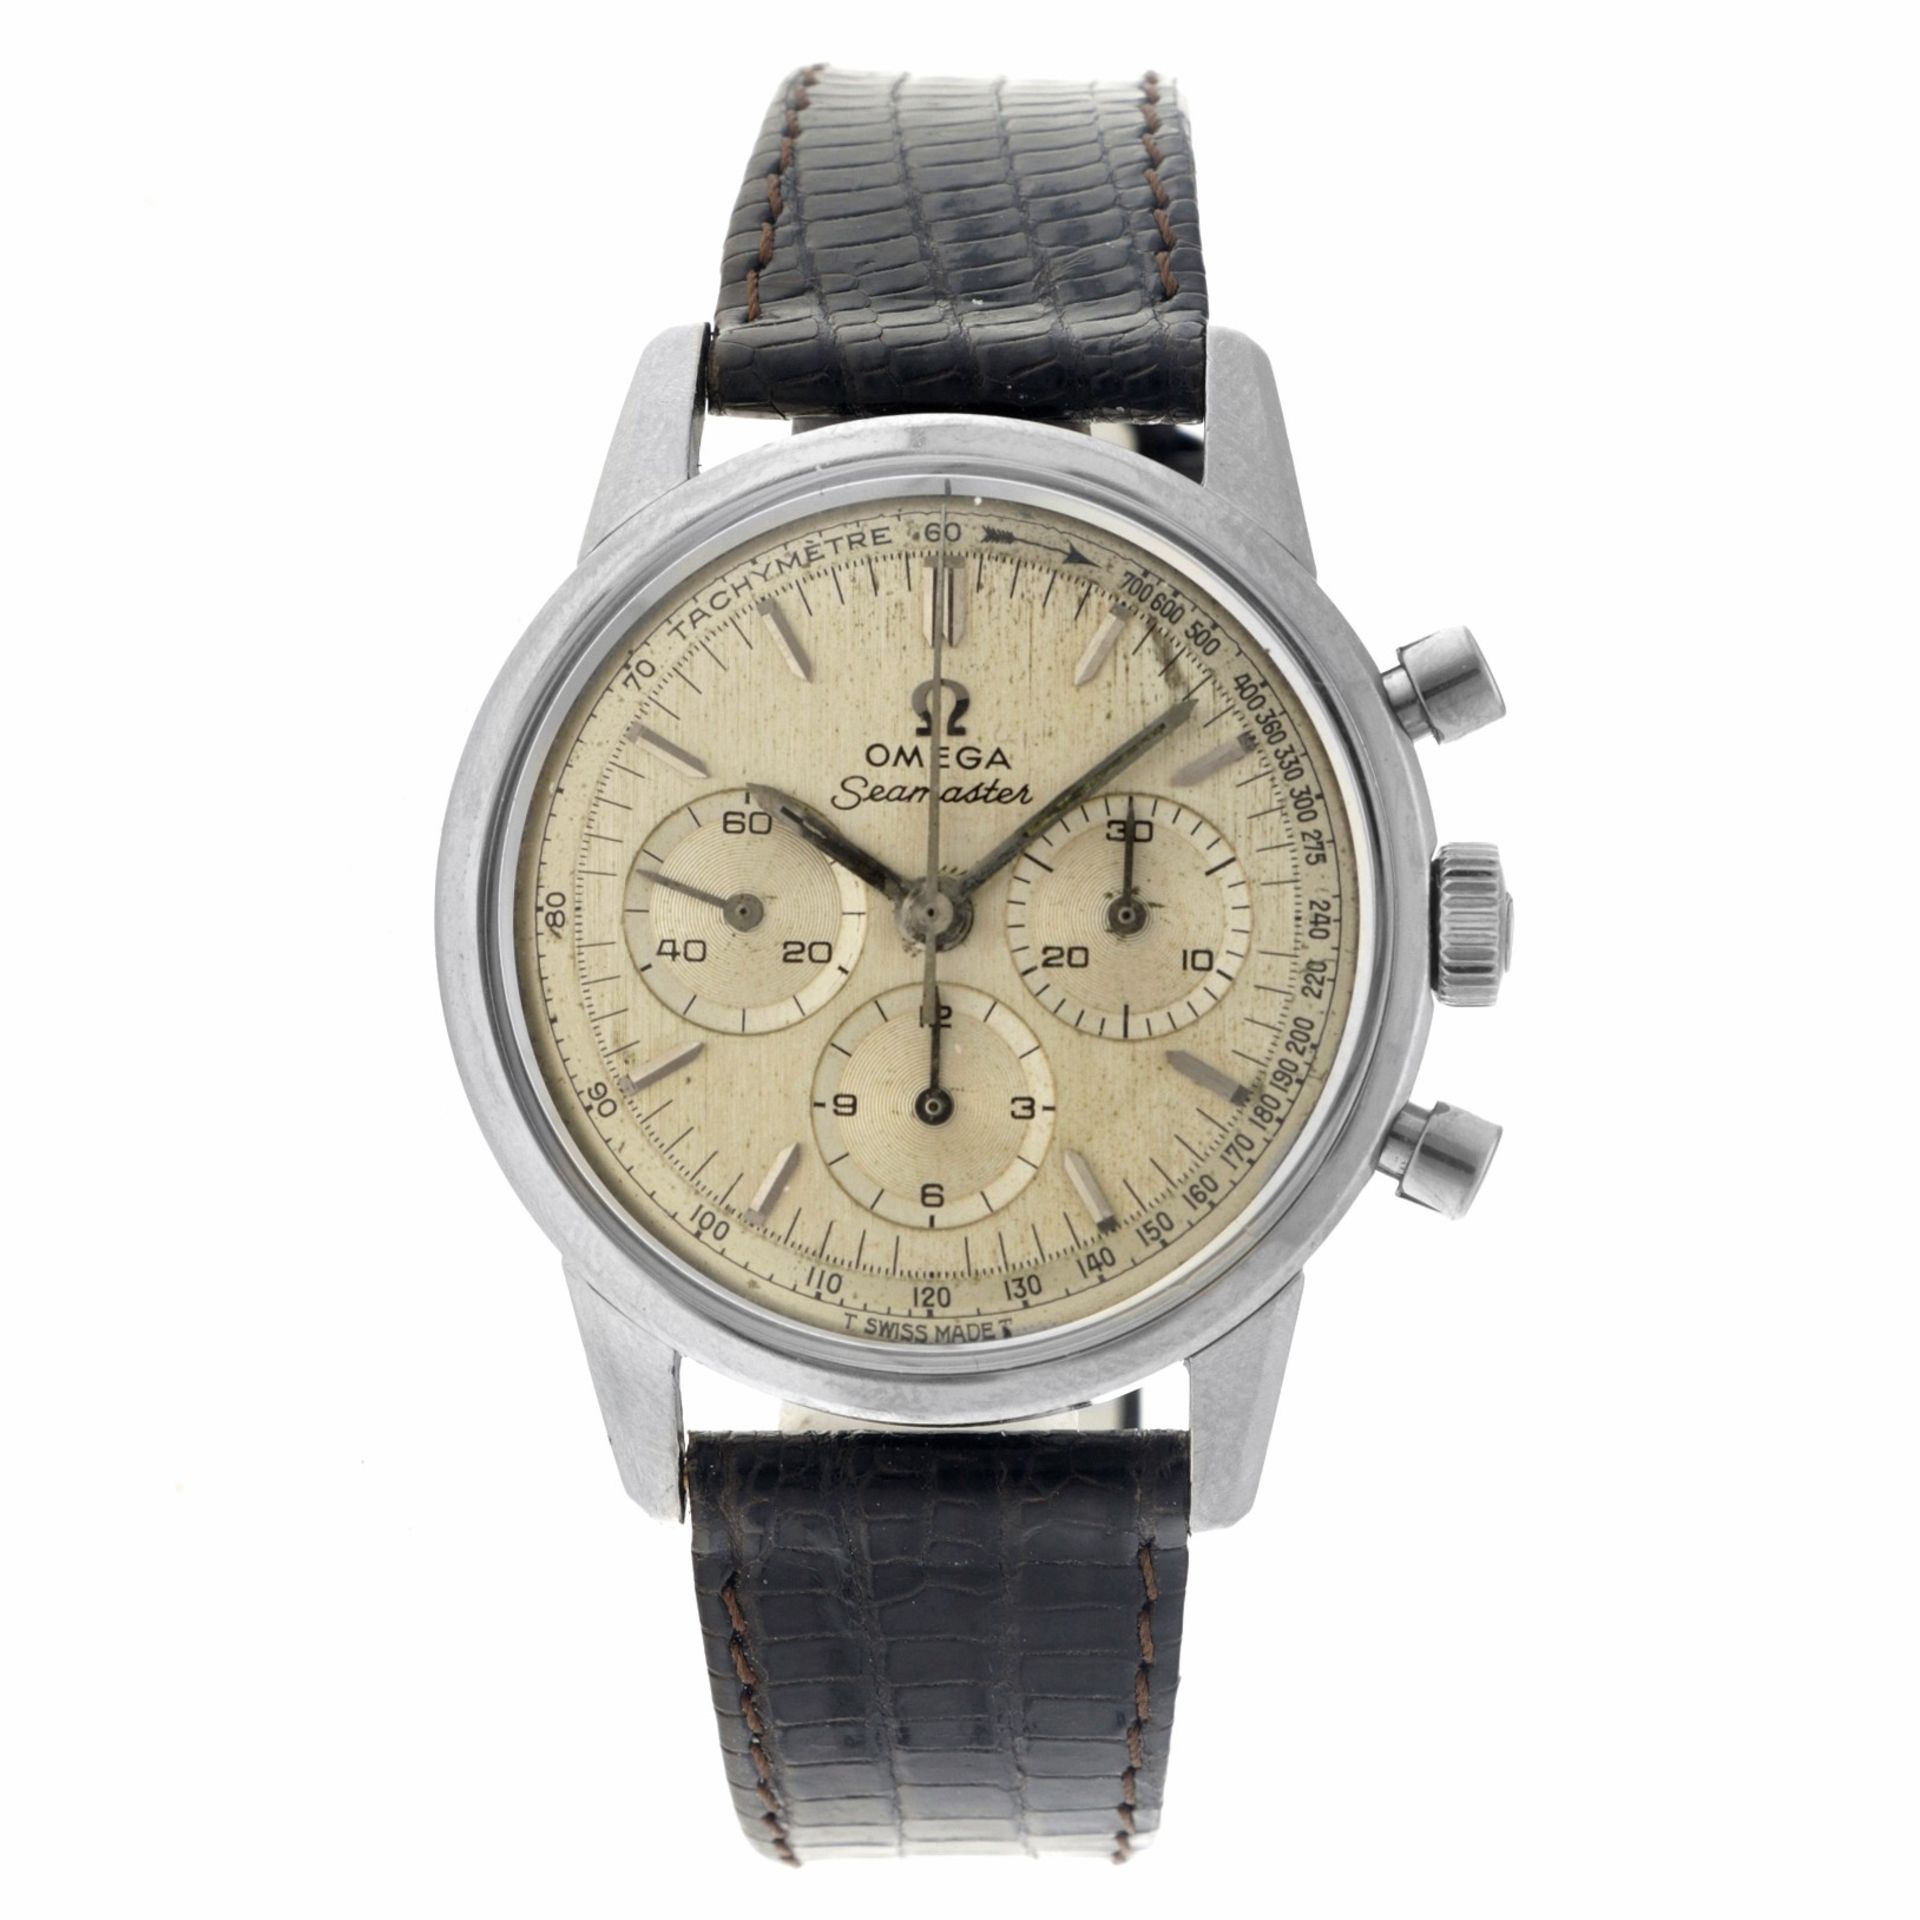 Omega Seamaster Chronograph 105.001 - Cal. 321 - Men's watch - approx. 1963.